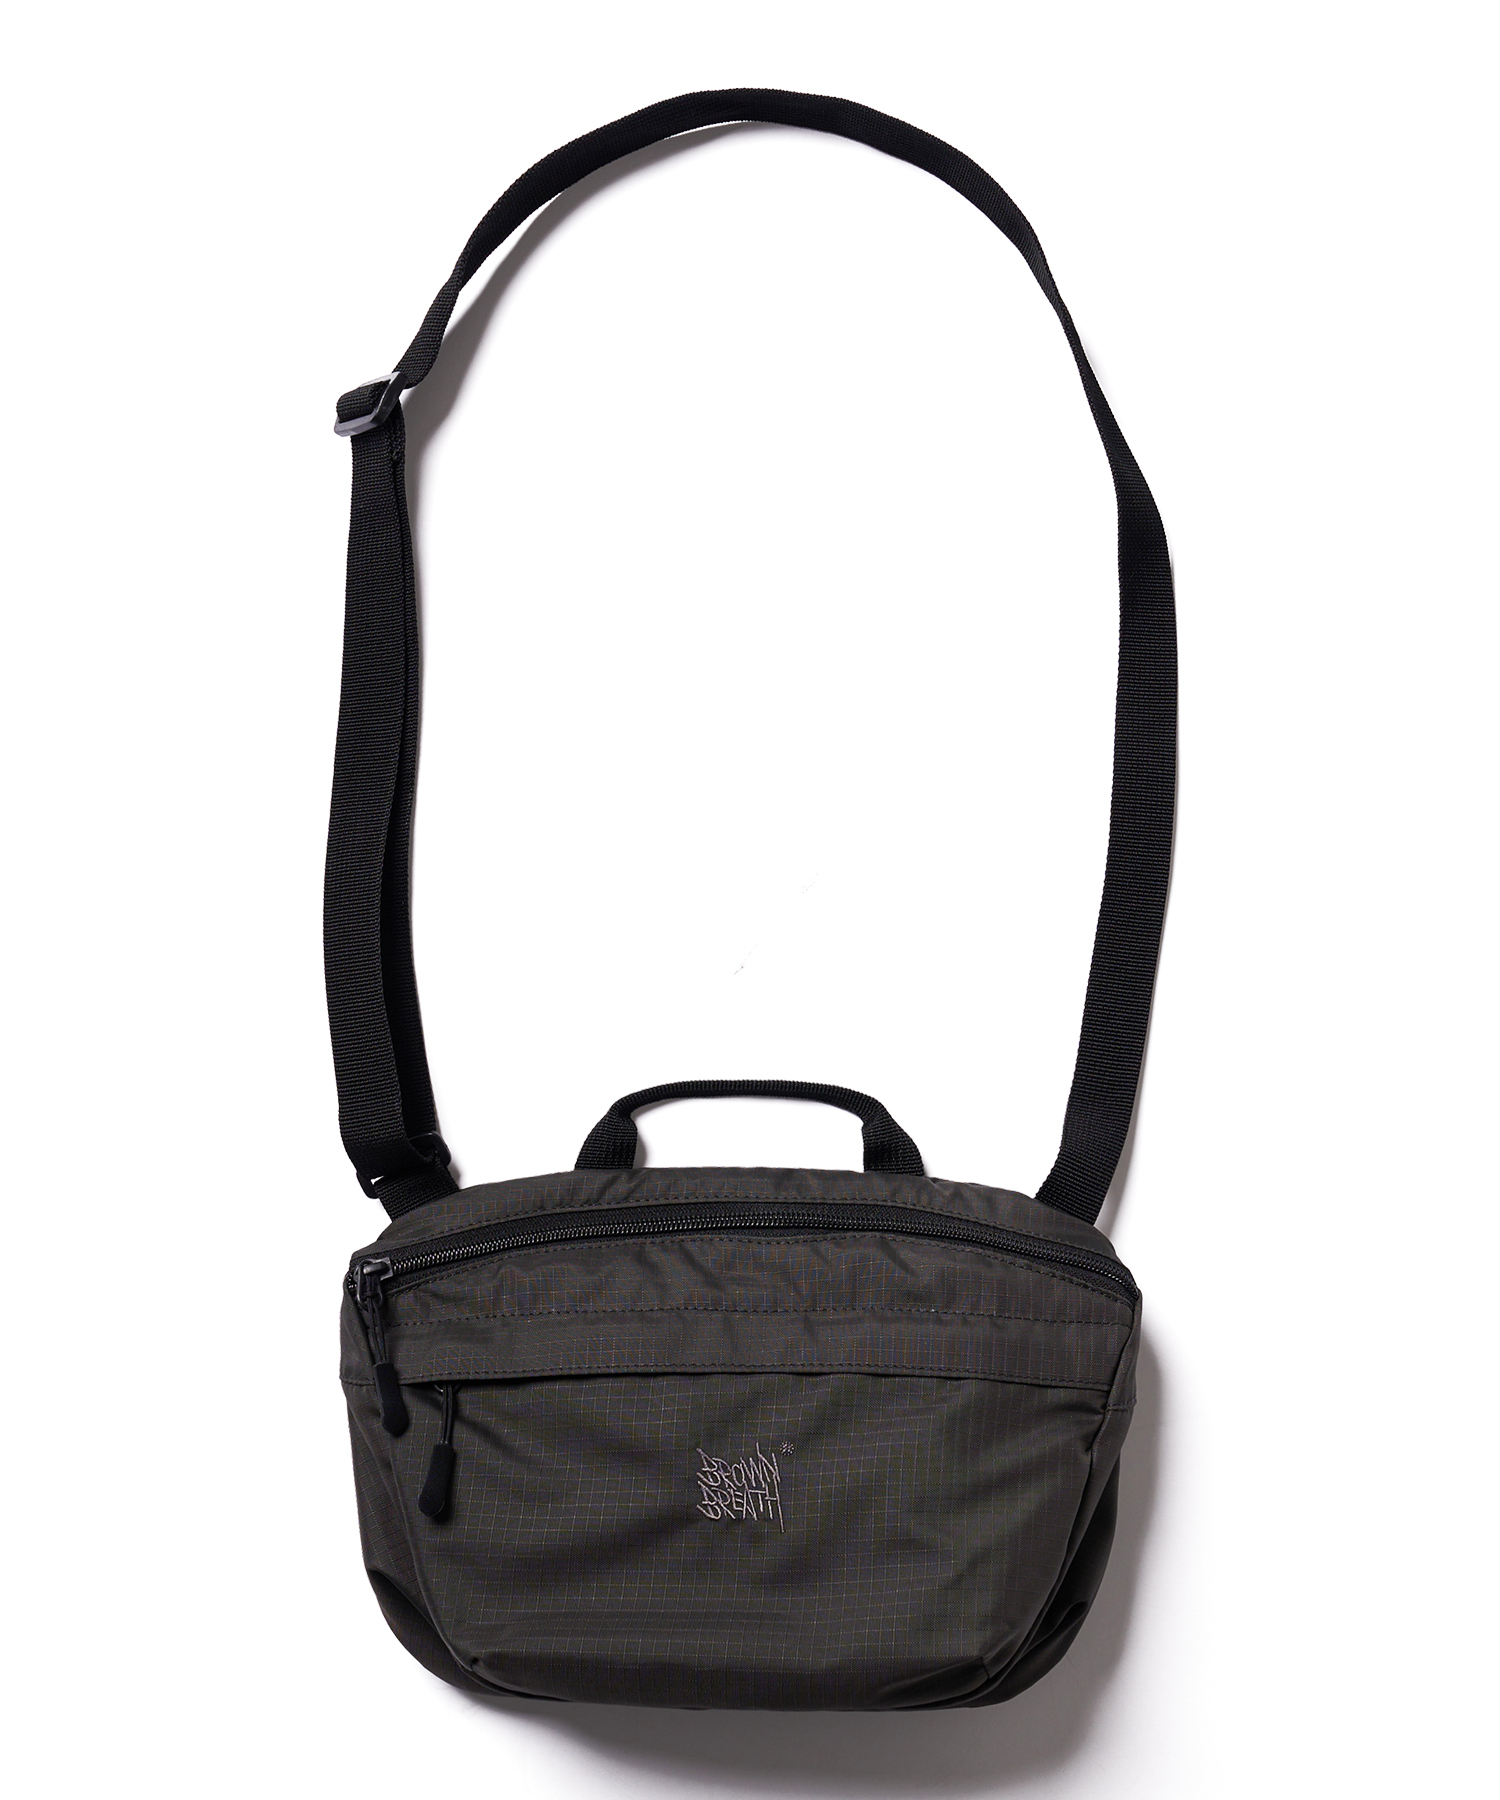 ACTS CROSS BAG - CHARCOAL